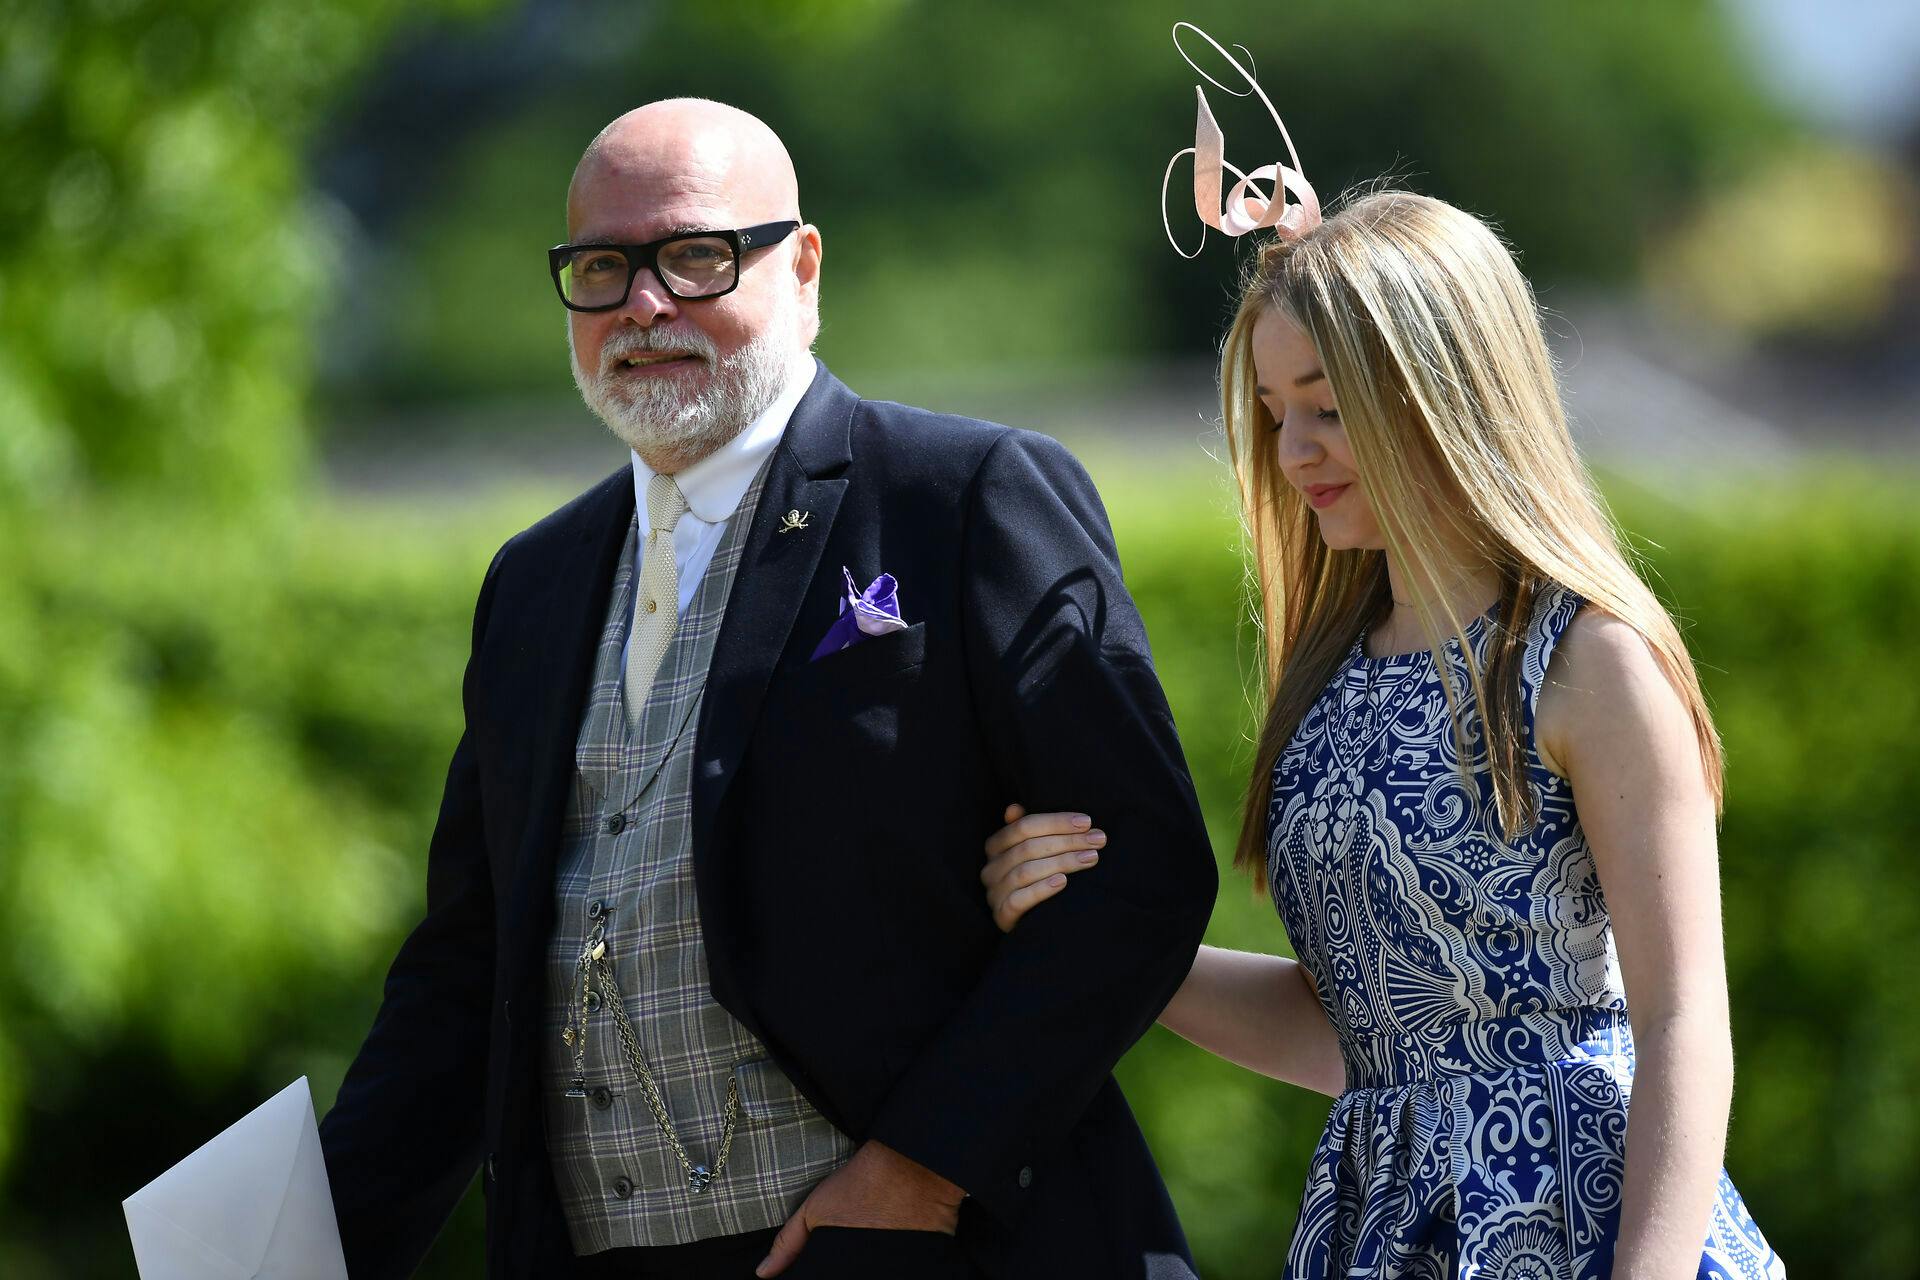 Gary Goldsmith, uncle of the bride, attends the wedding of Pippa Middleton and James Matthews at St Mark's Church in Englefield, west of London, on May 20, 2017. REUTERS/Justin Tallis/Pool